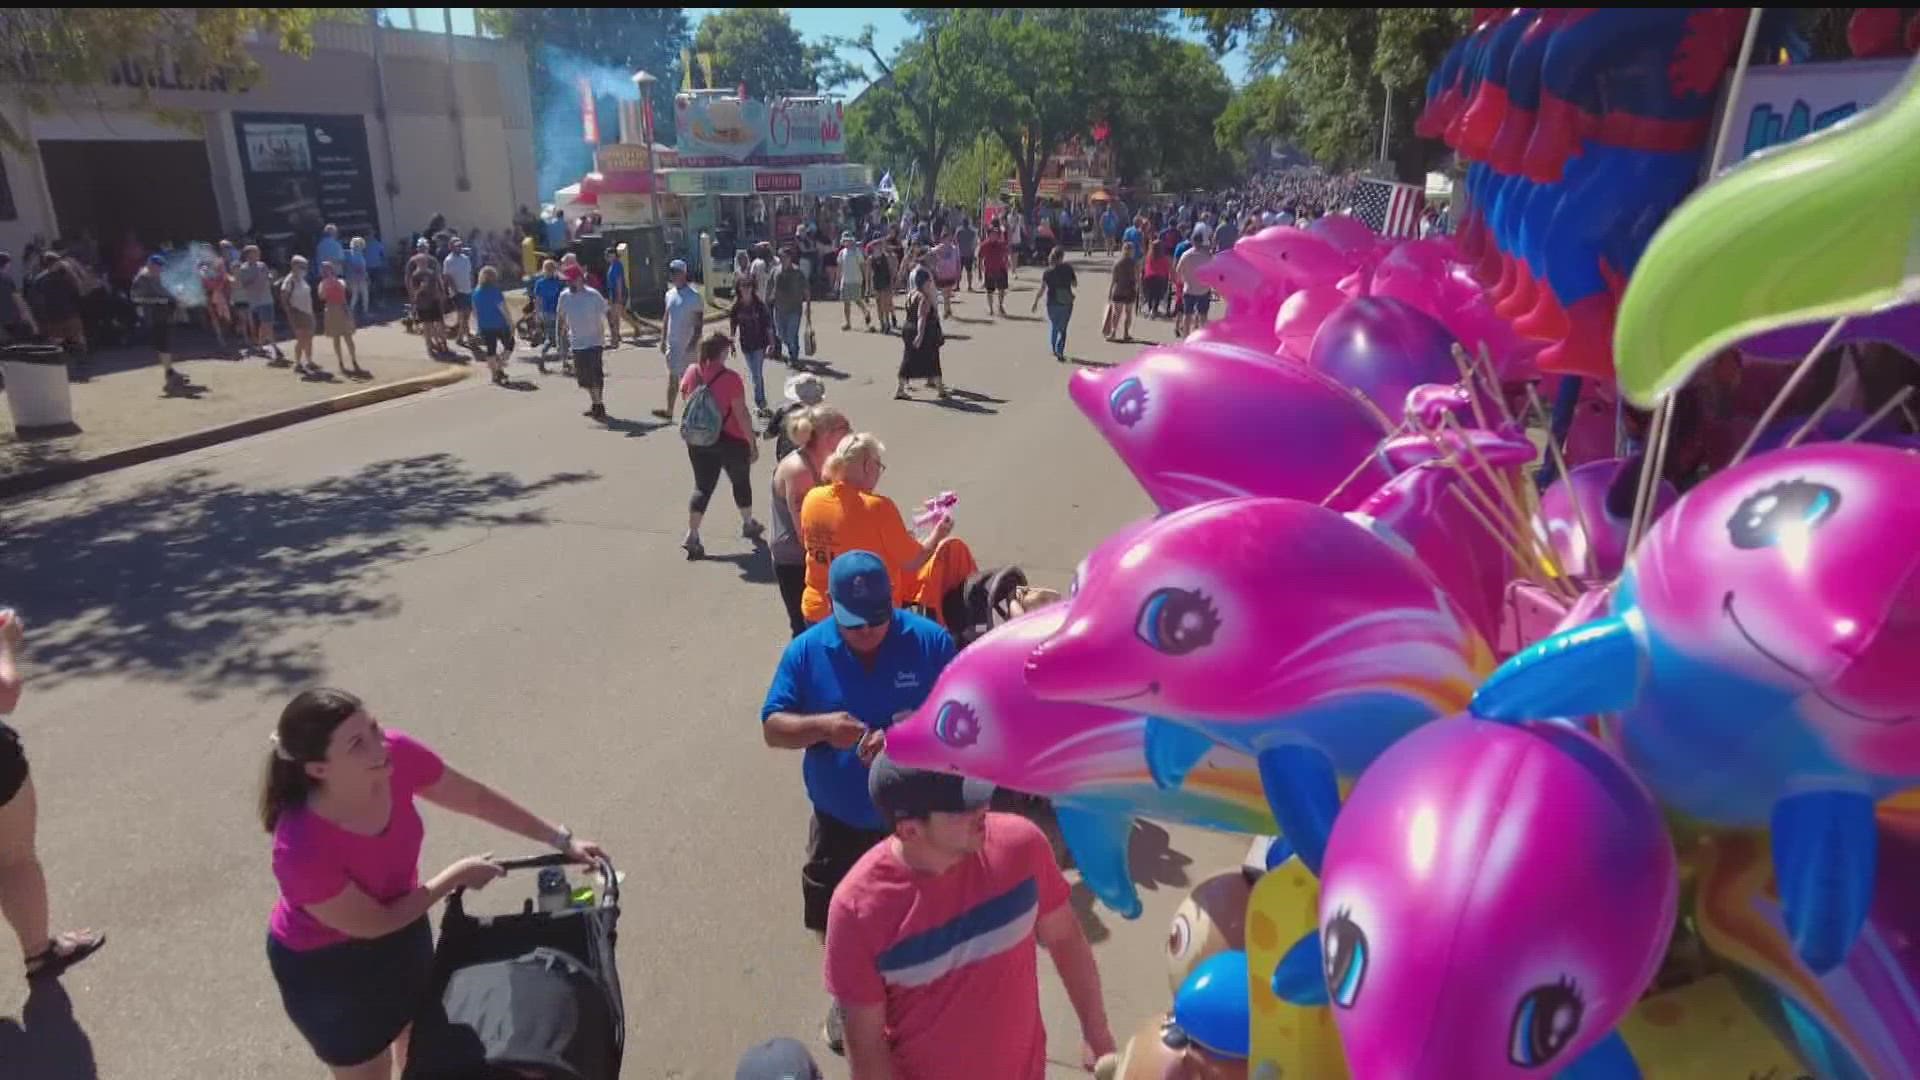 KARE 11 photojournalist Jason Steussy got to check out the sights, sounds and smells of the Minnesota State Fair — all from a half-pint point of view.